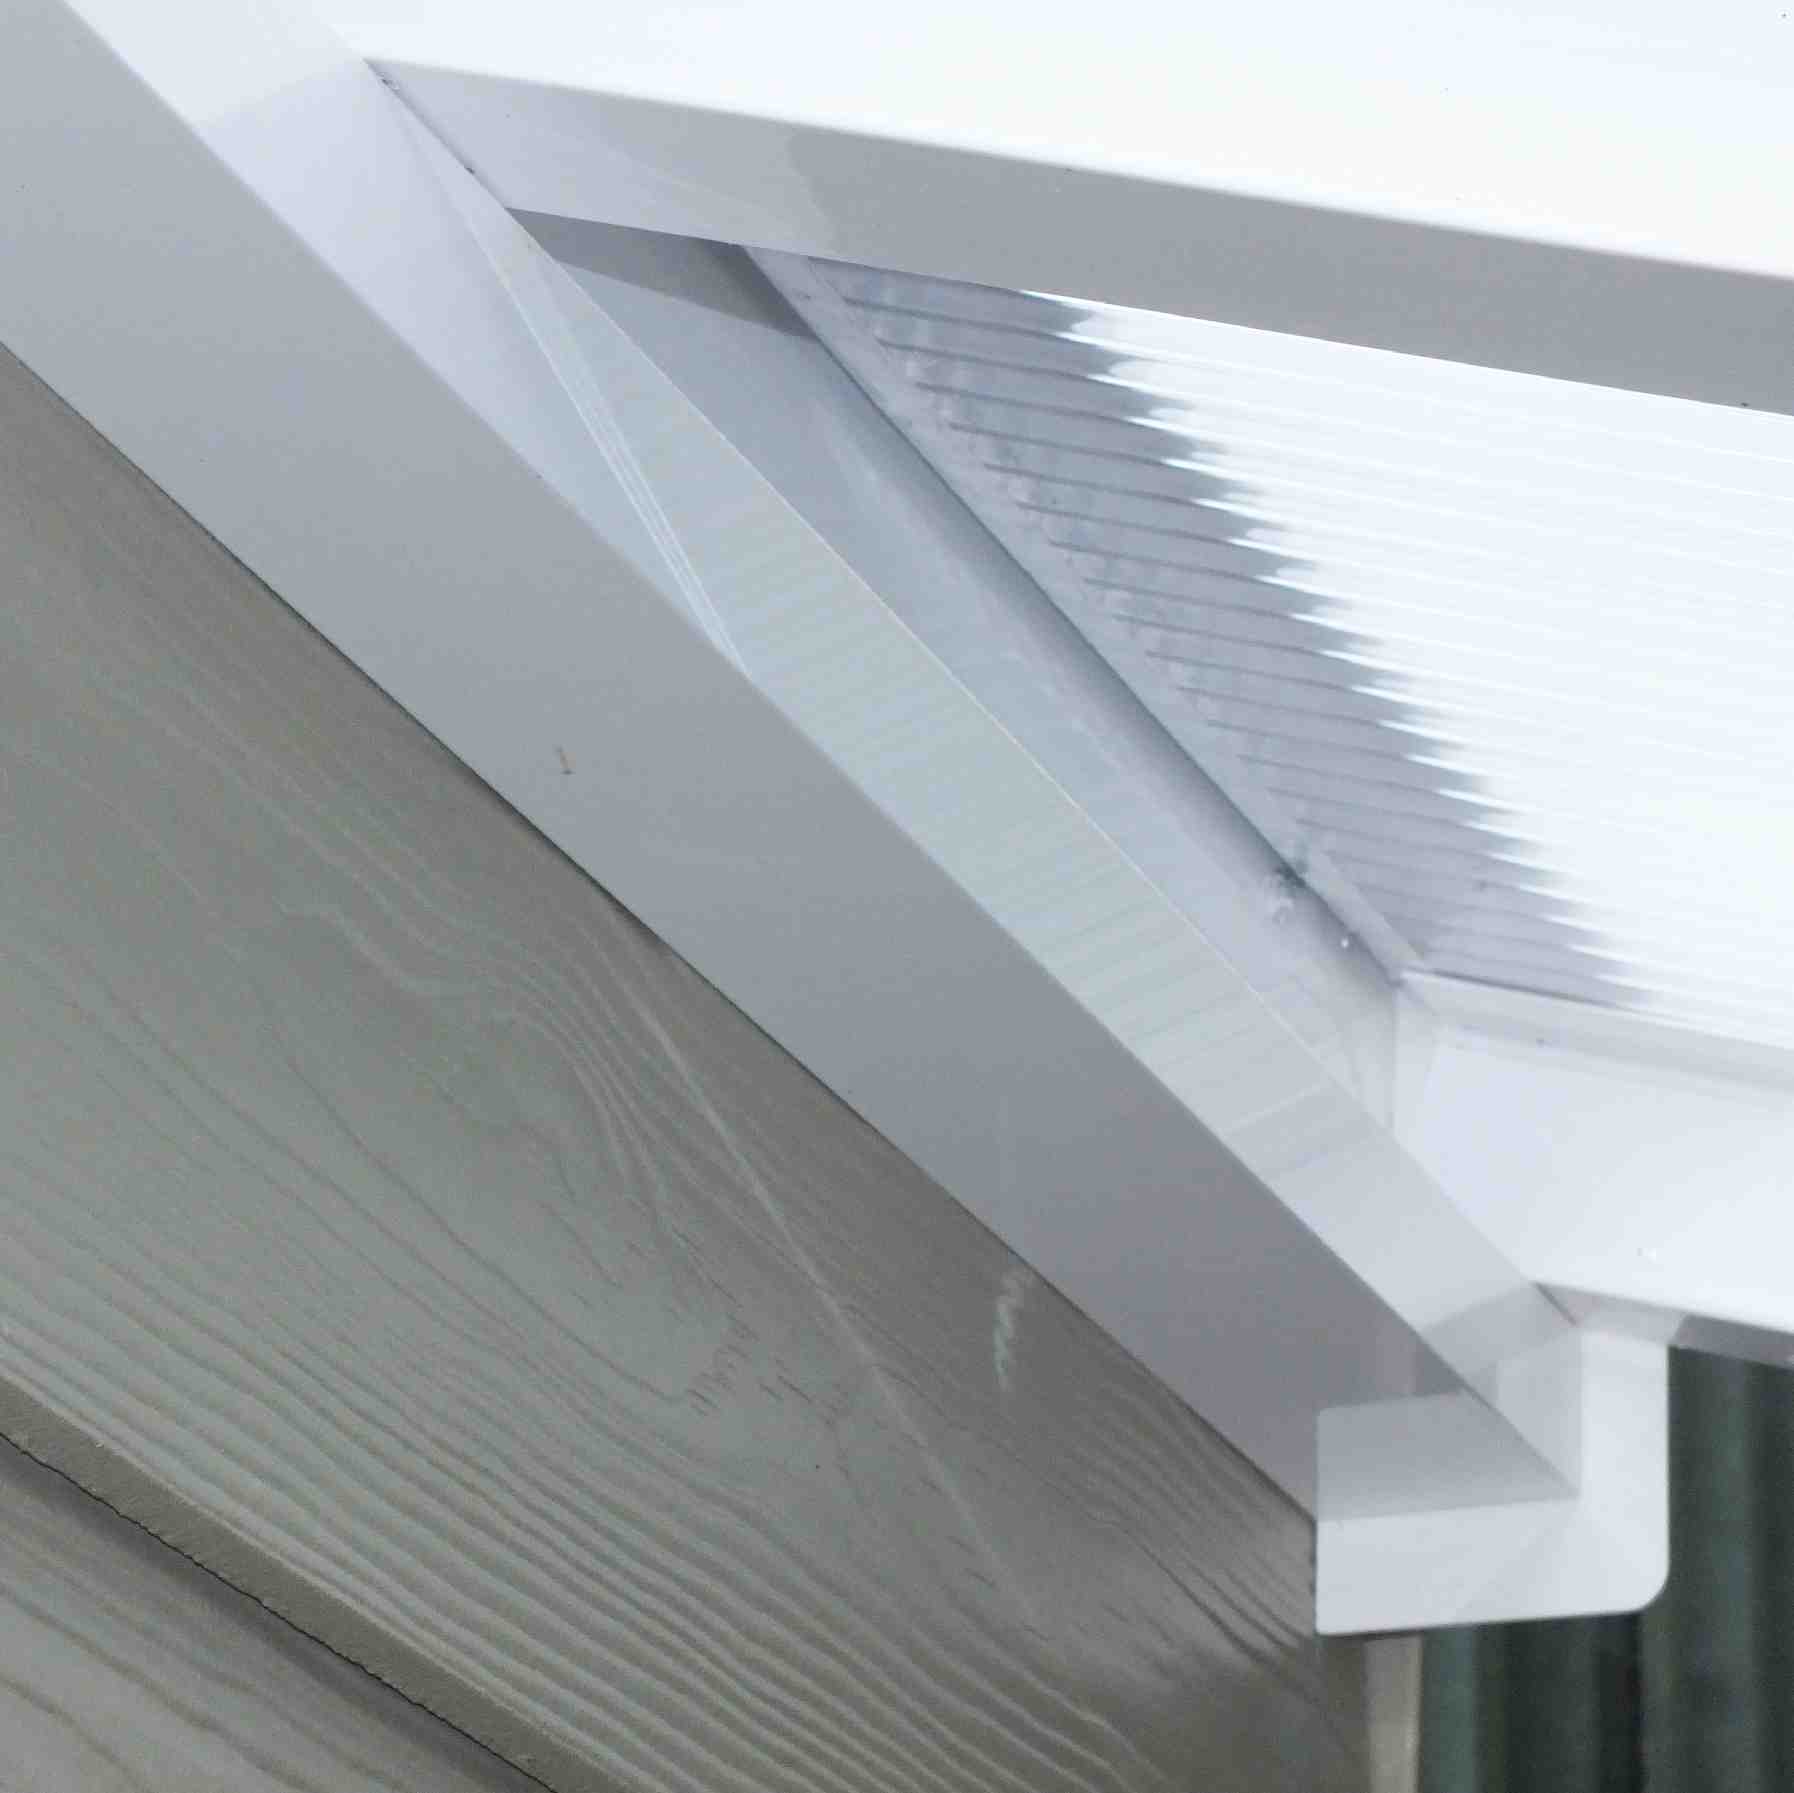 Great deals on Omega Verandah White with 16mm Polycarbonate Glazing - 7.4m (W) x 3.0m (P), (4) Supporting Posts